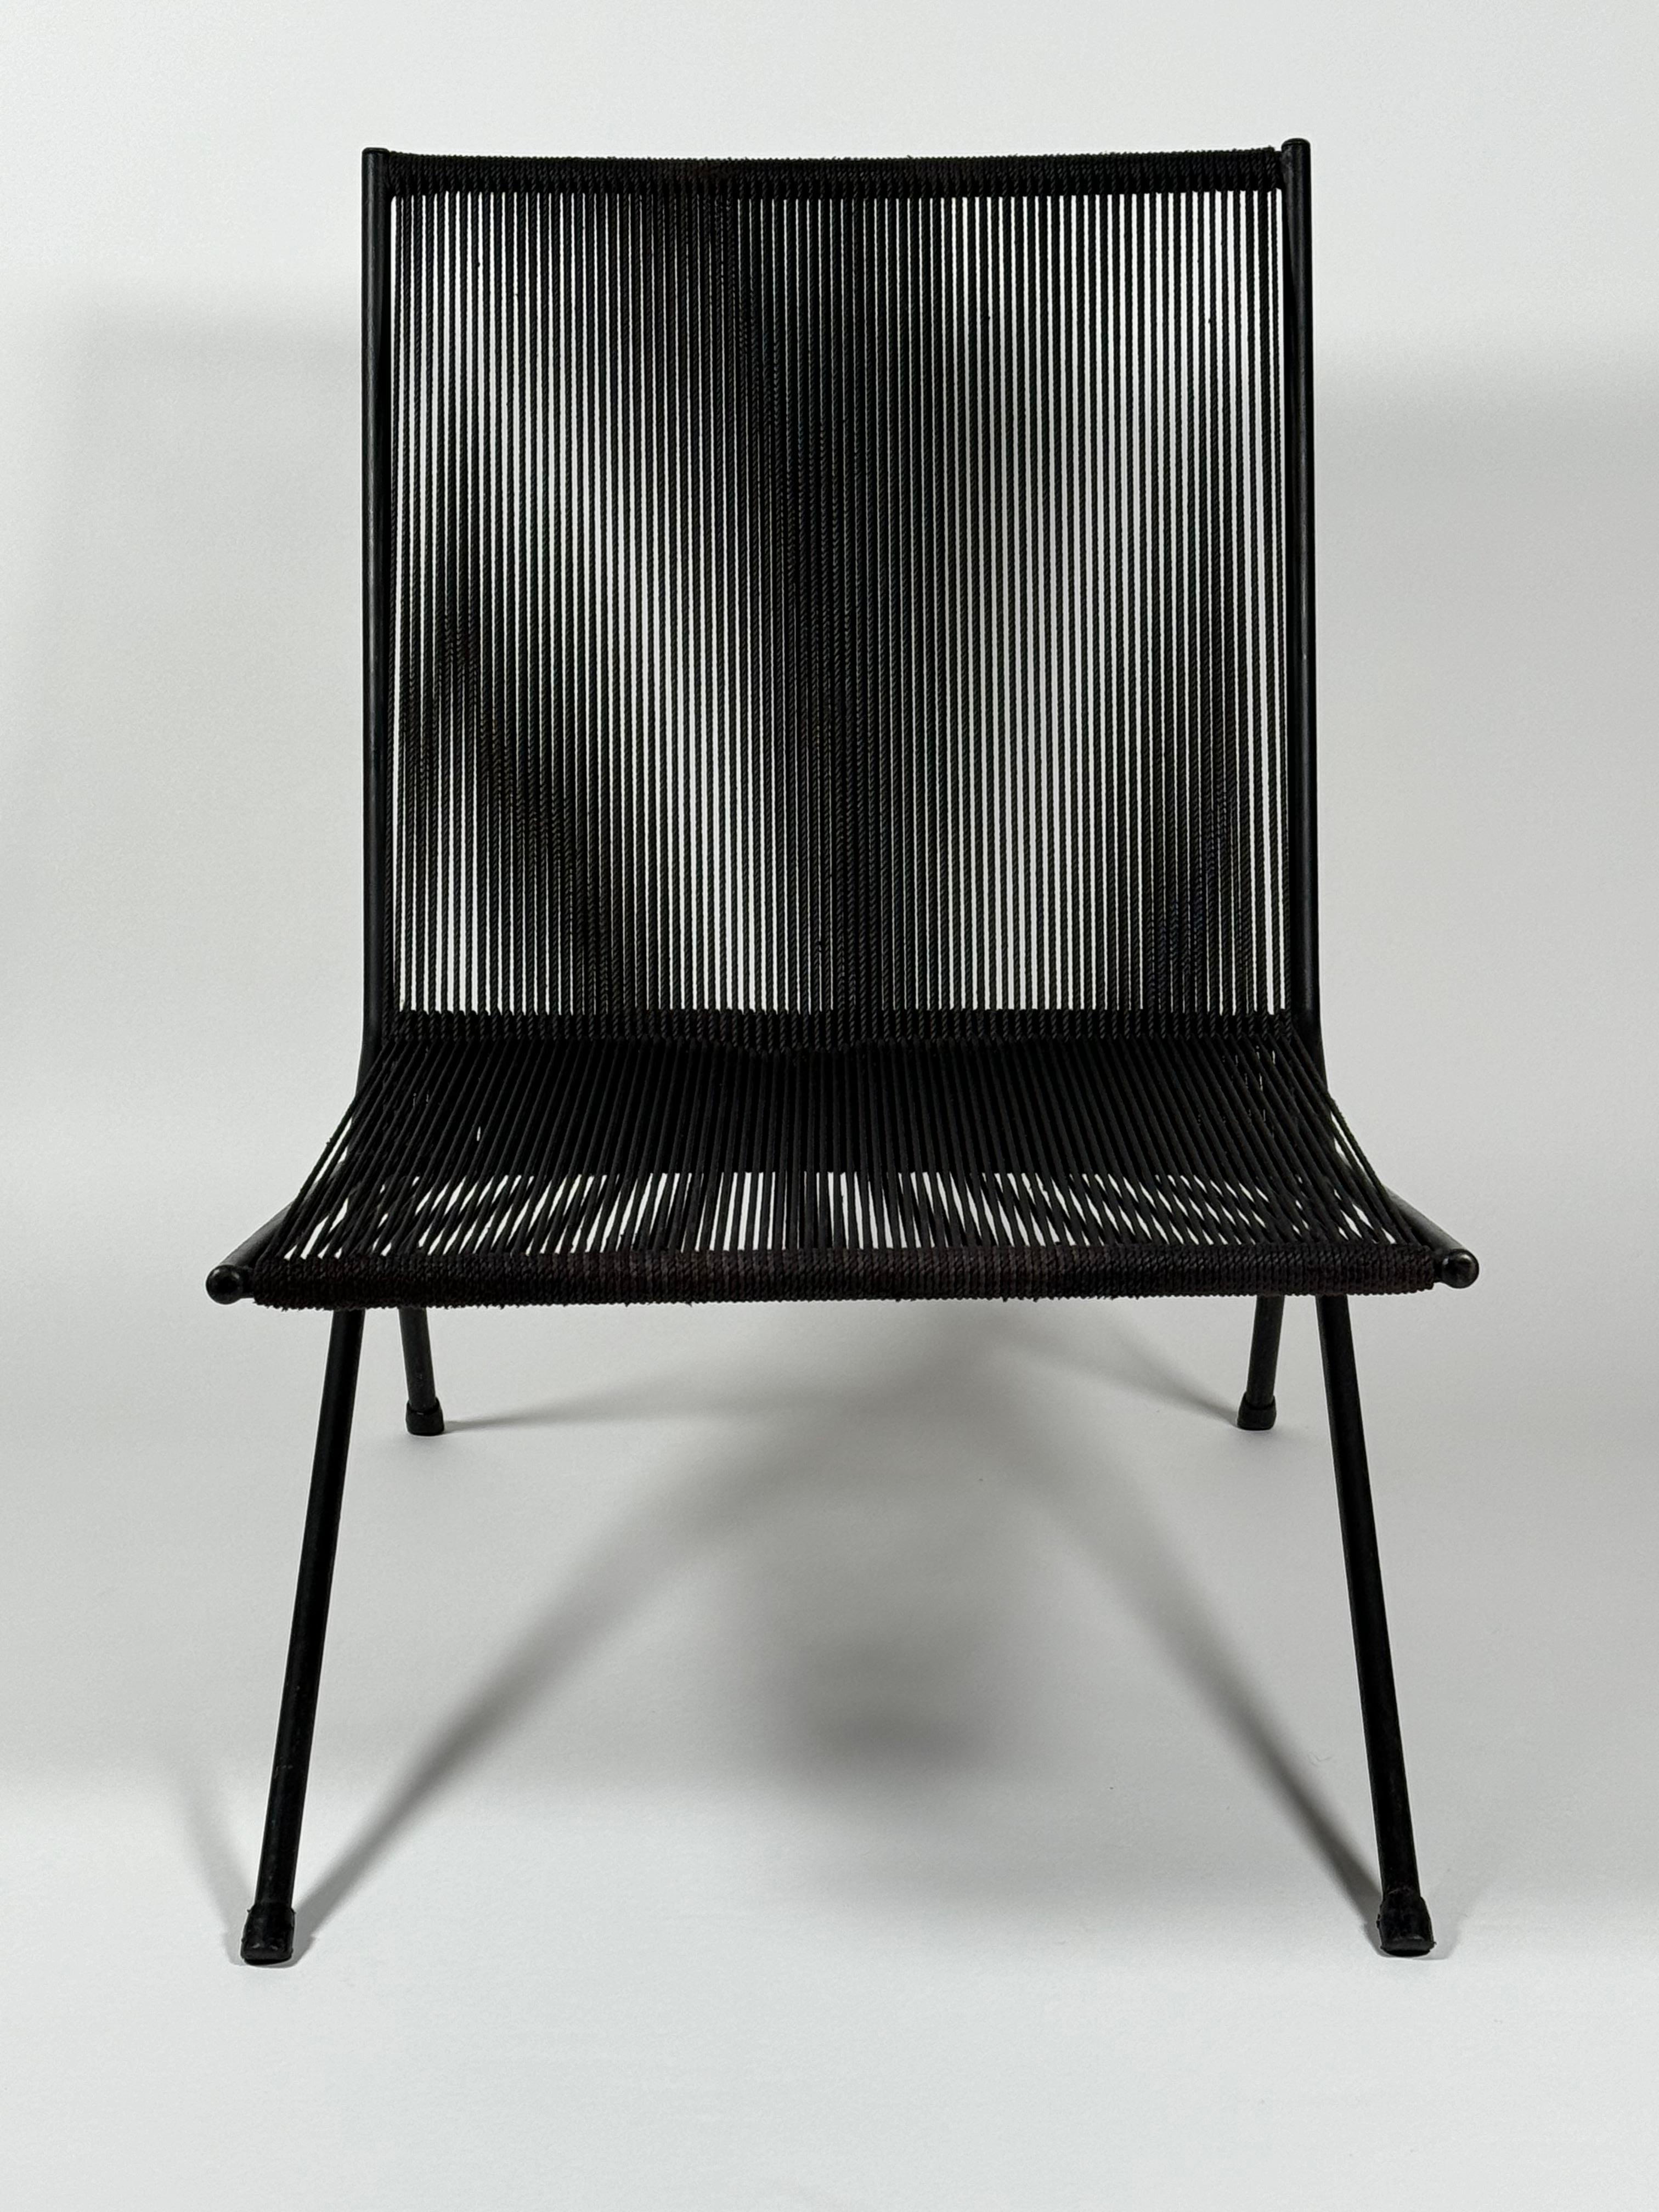 Steel and string indoor or outdoor lounge chair designed by New York designer Allan Gould circa 1950s. Constructed of black cotton cording and a black lacquered steel frame. This was his trademark design with its clean modernist lines and the optics